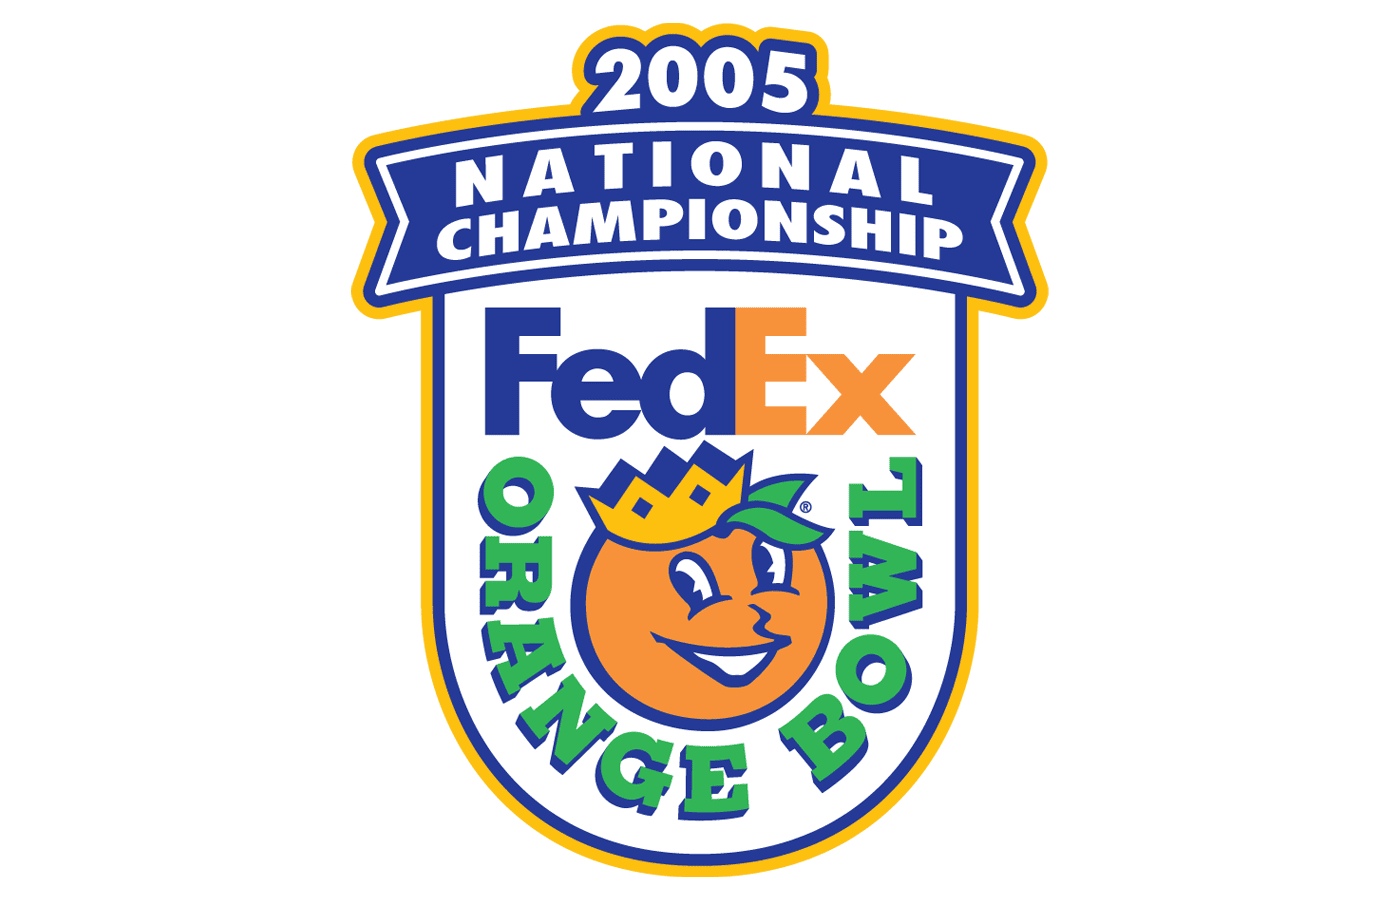 BCS Championship Game Logo and symbol, meaning, history, PNG, brand